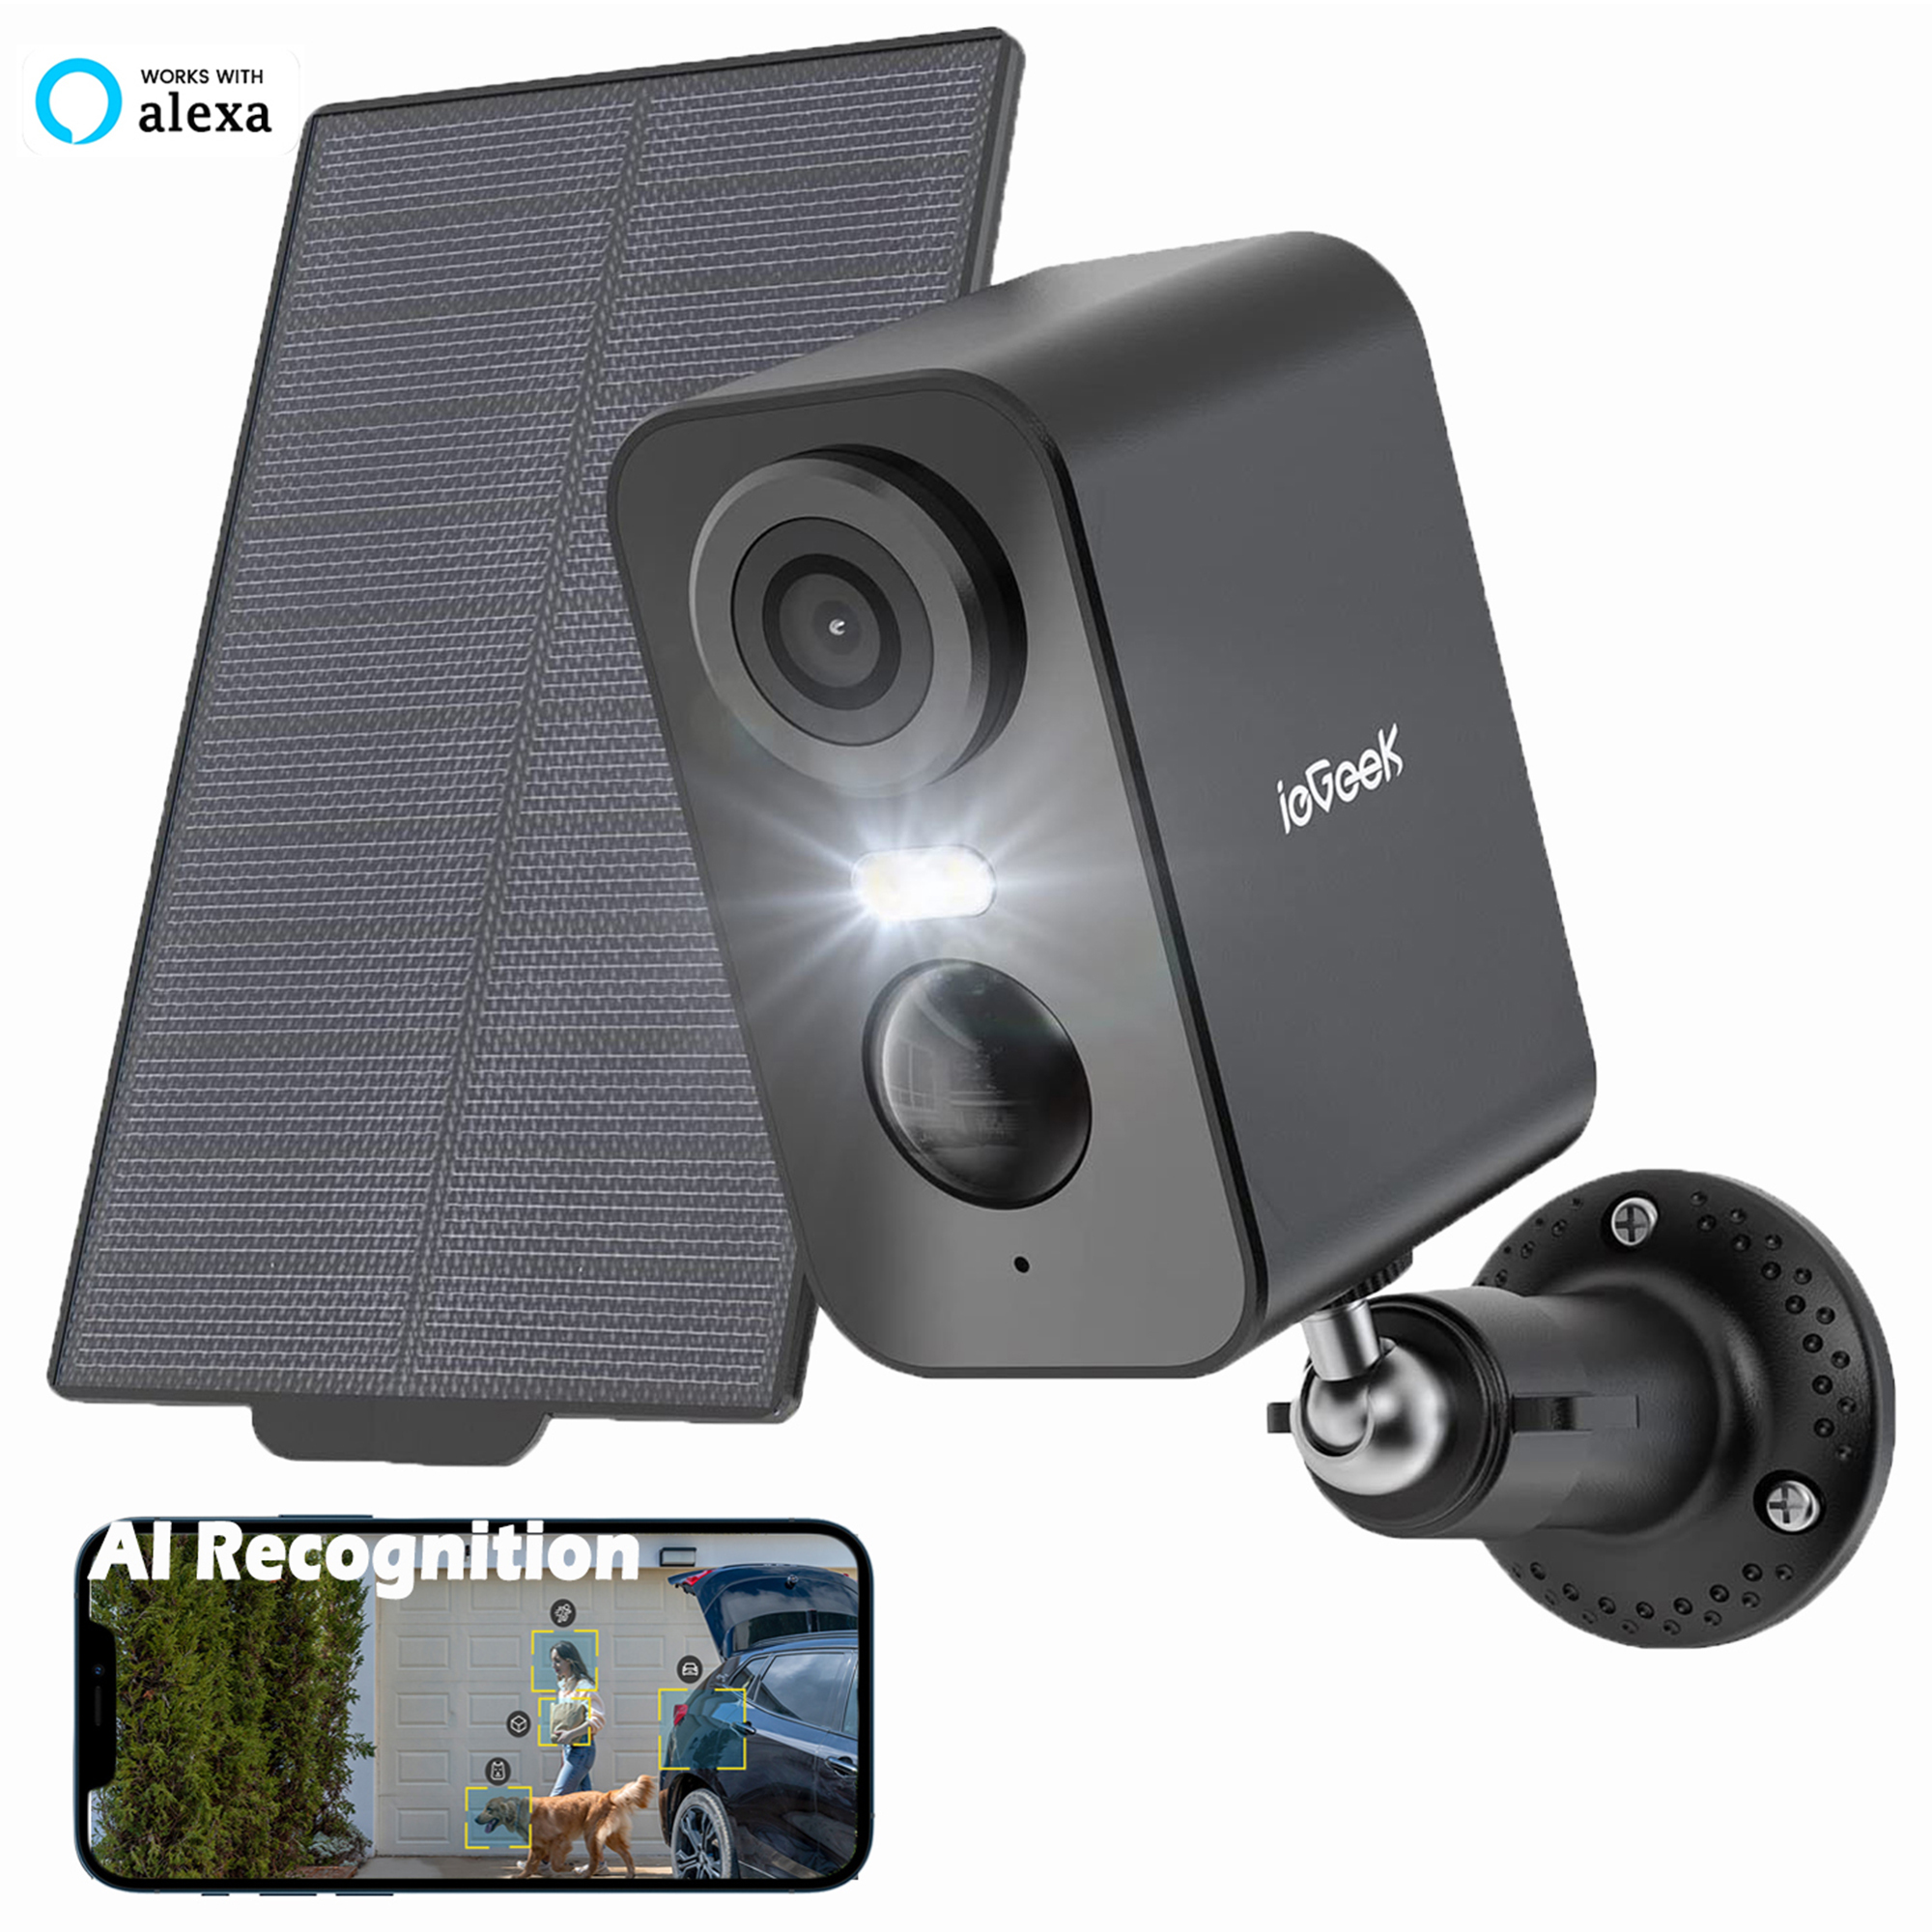 ieGeek Outdoor Solar Security Camera with Spotlight Siren, Wireless, WiFi, 2k/3mp Color Night Vision Outdoor Camera with AI Motion Detection, Work with Alexa (Supports Only 2.4Ghz Wi-Fi) - image 1 of 10